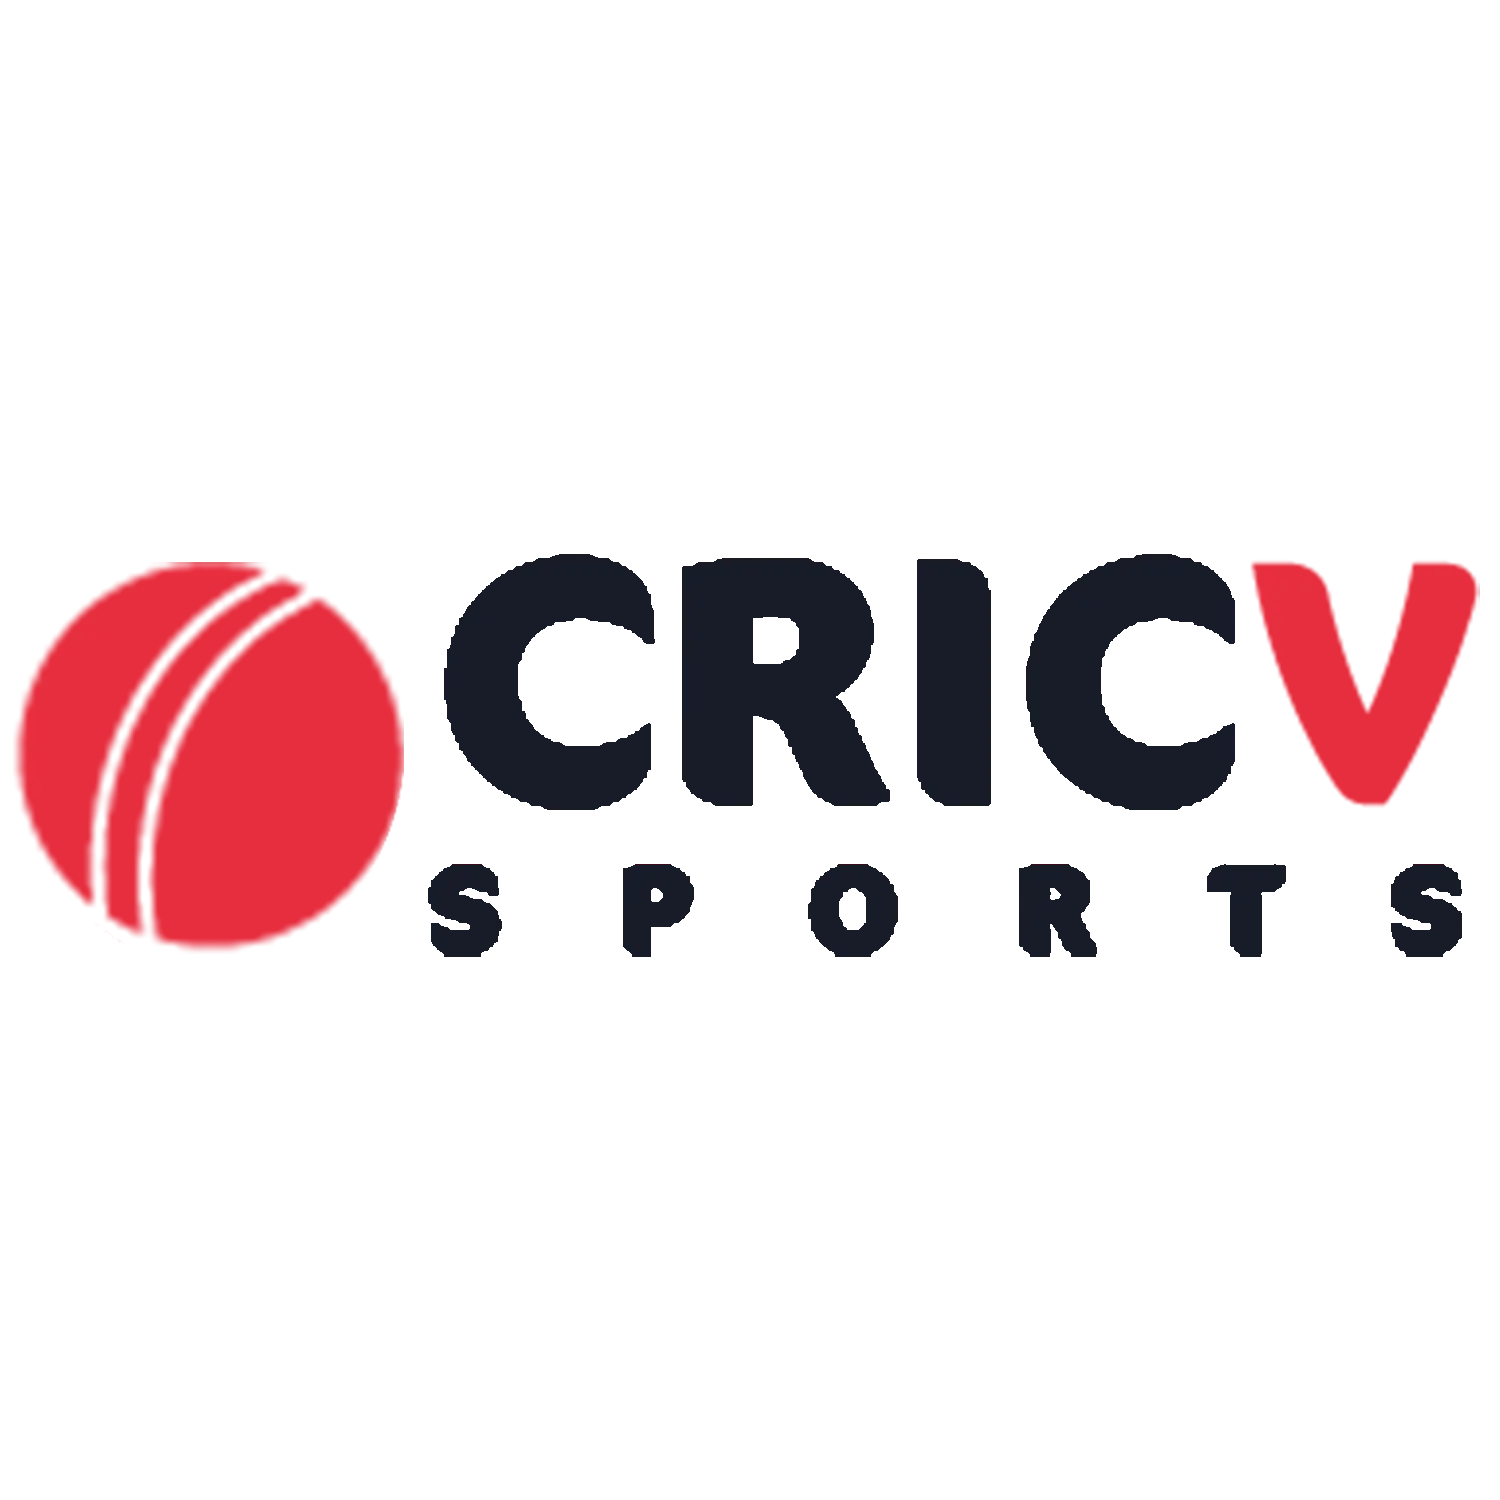 Bet on sports and play online casino at Cricv.